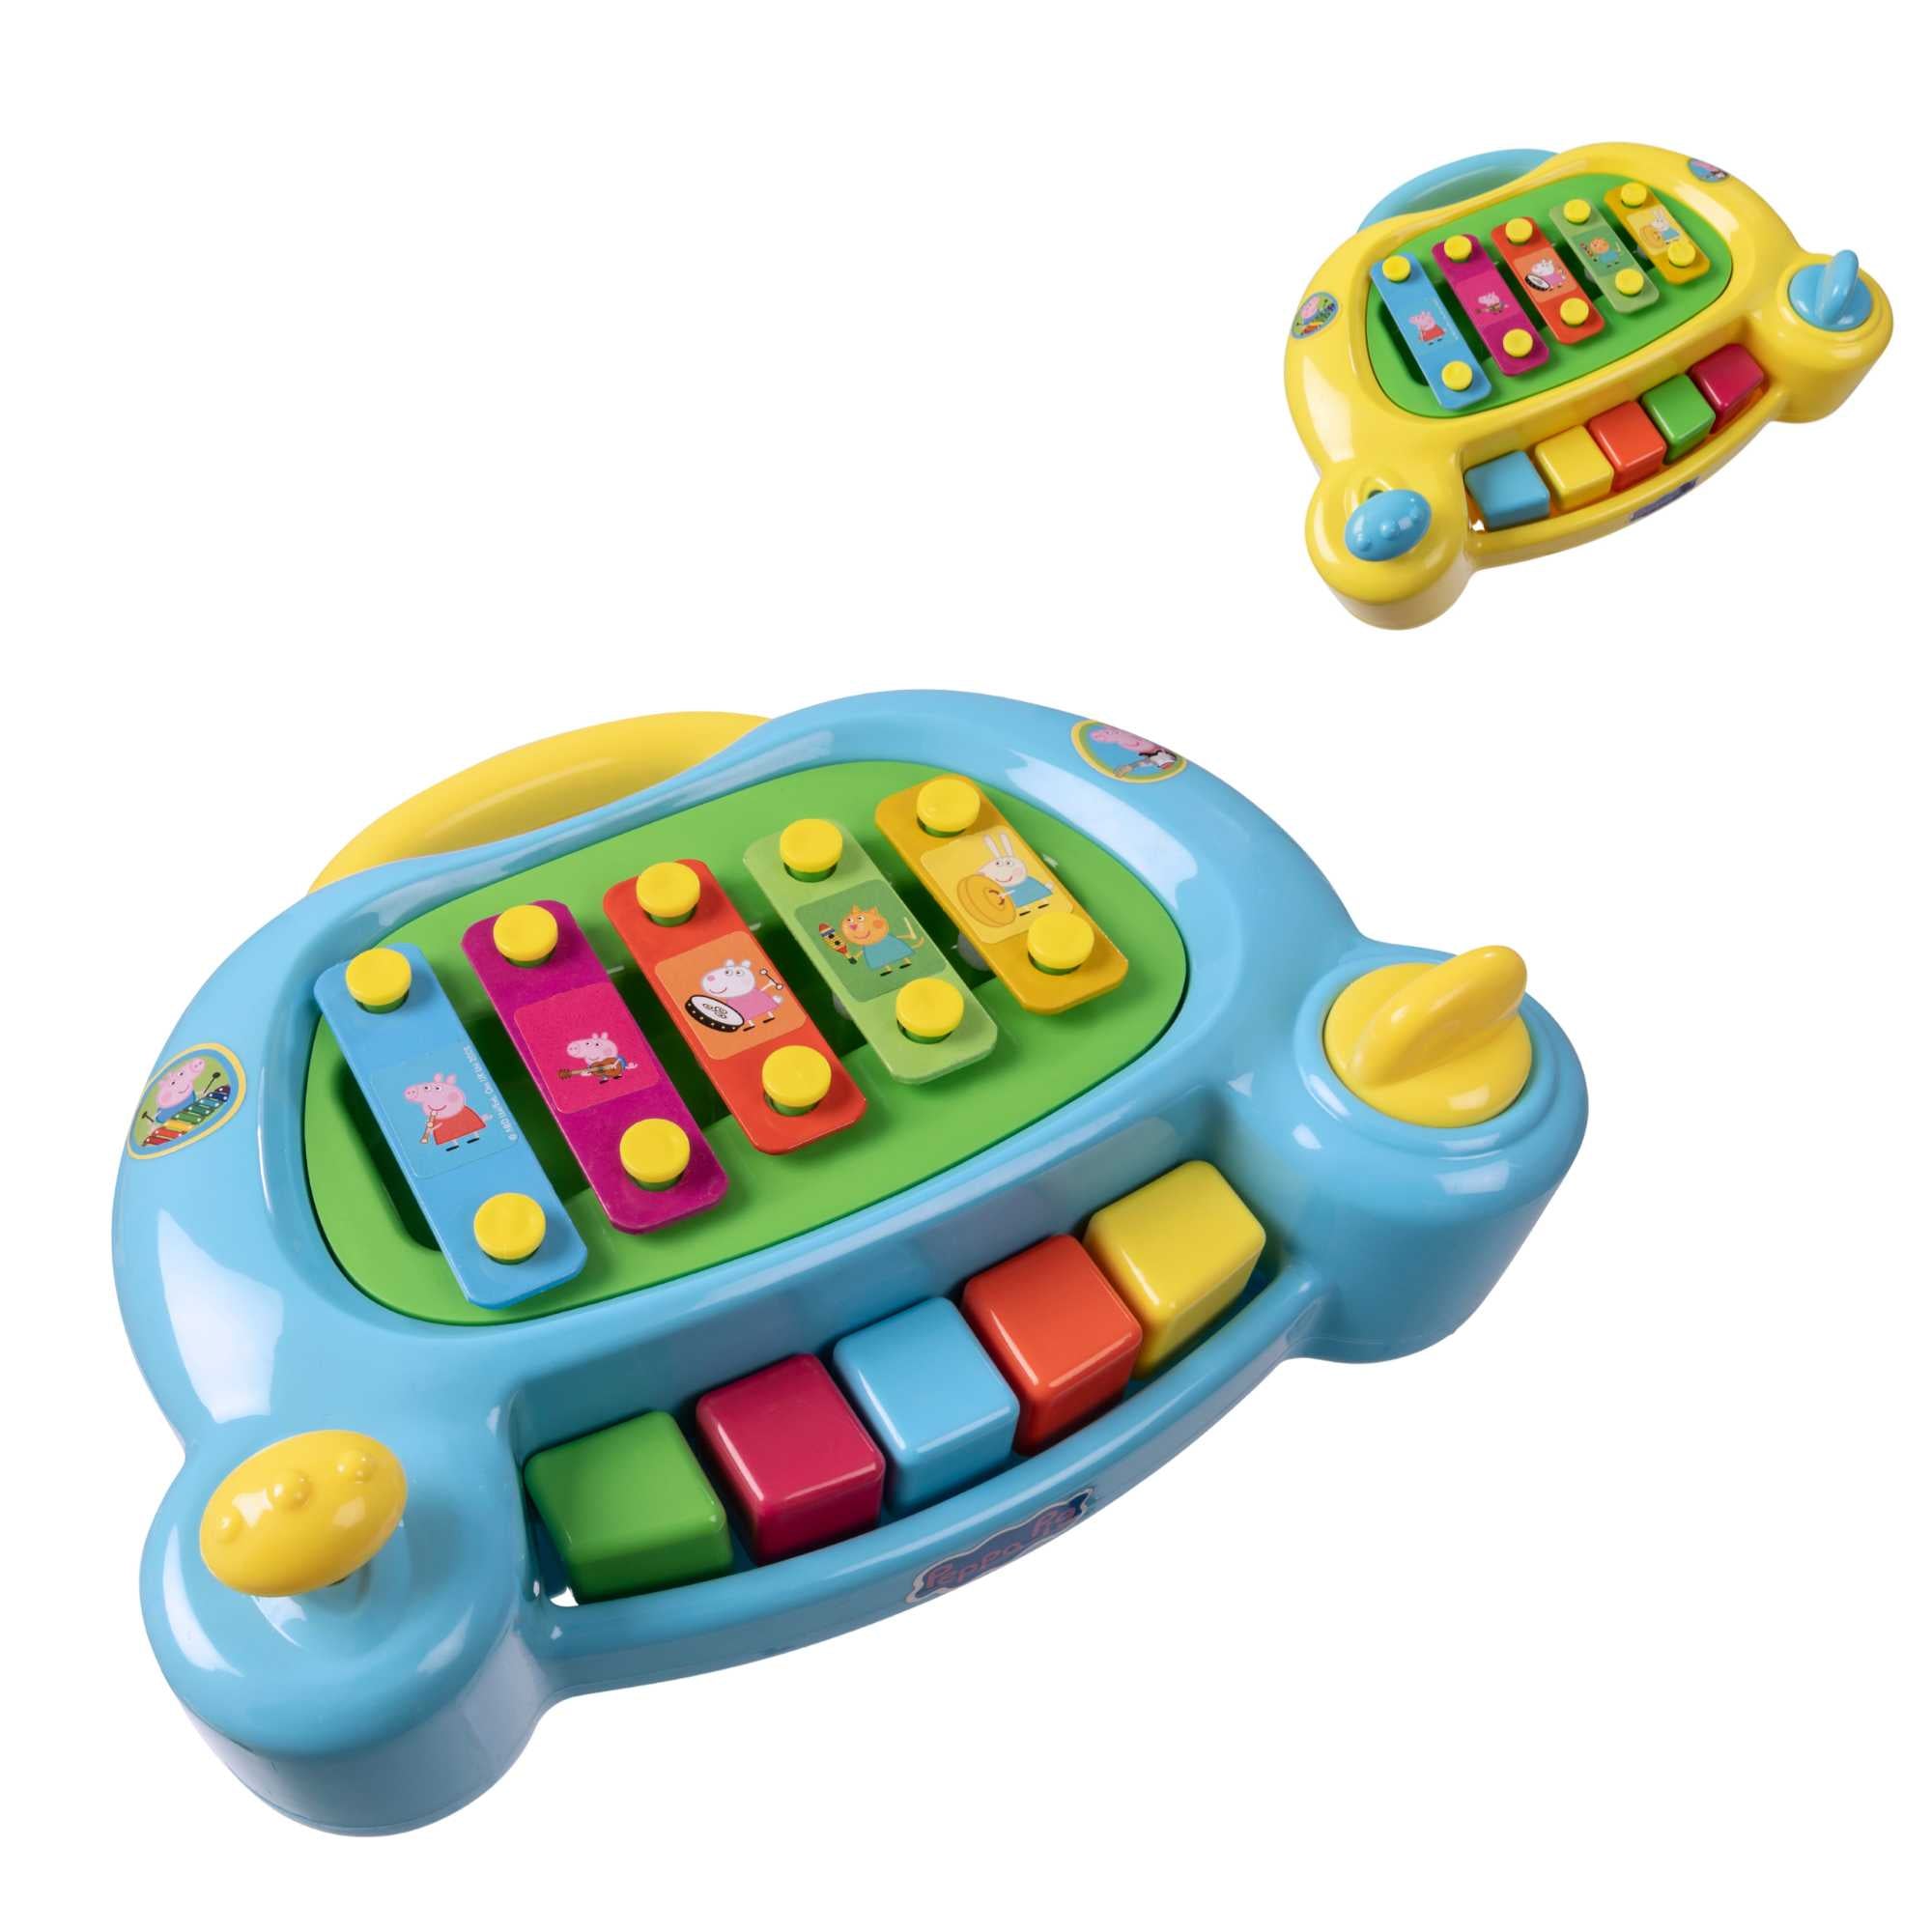 Image of Peppa Pig My First 2-IN-1 Piano - Xylophone & Piano